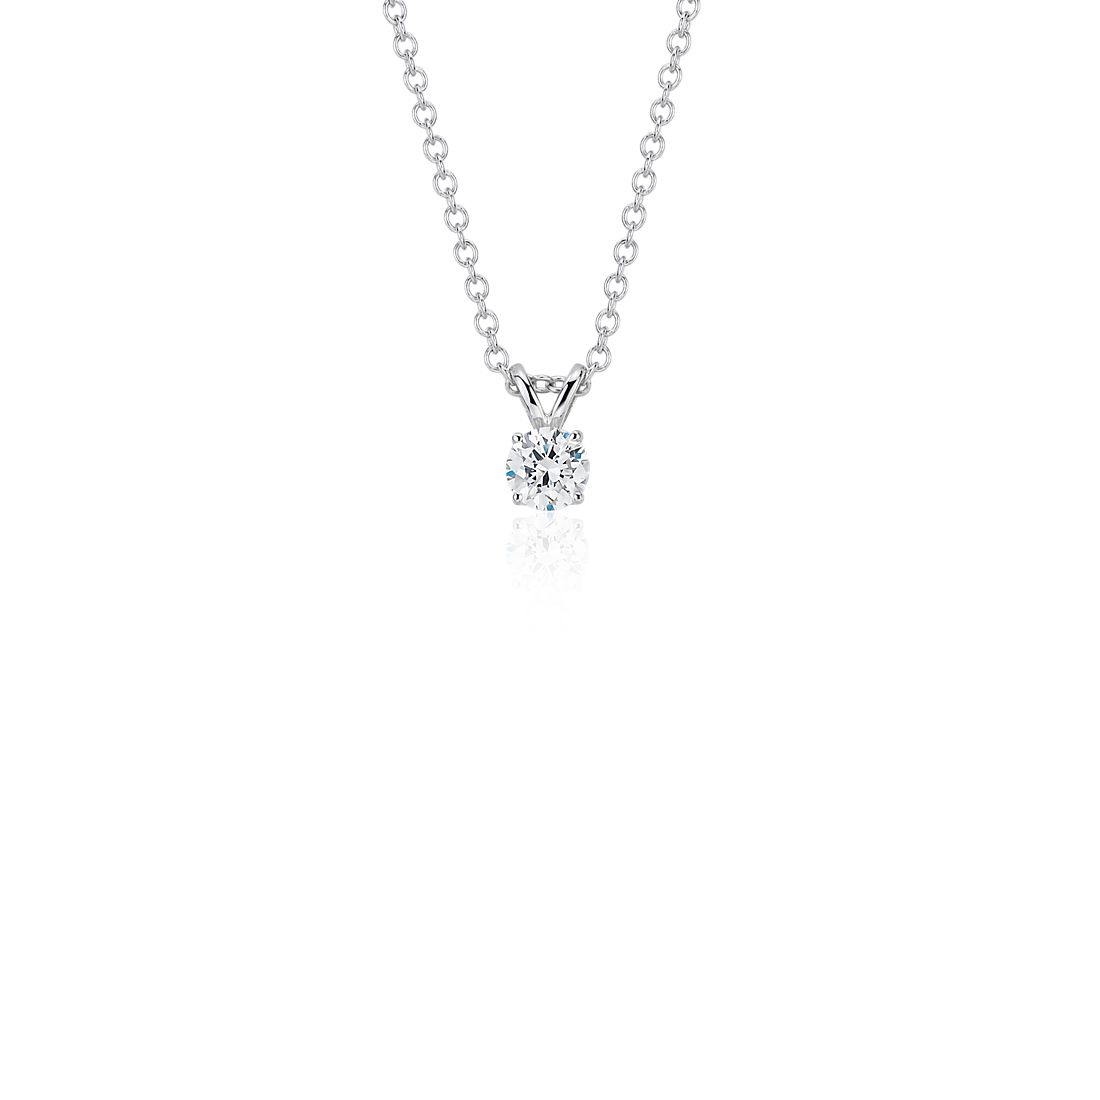 1/4Ct Solitaire Diamond Pendant available in 14K White or Yellow Gold 